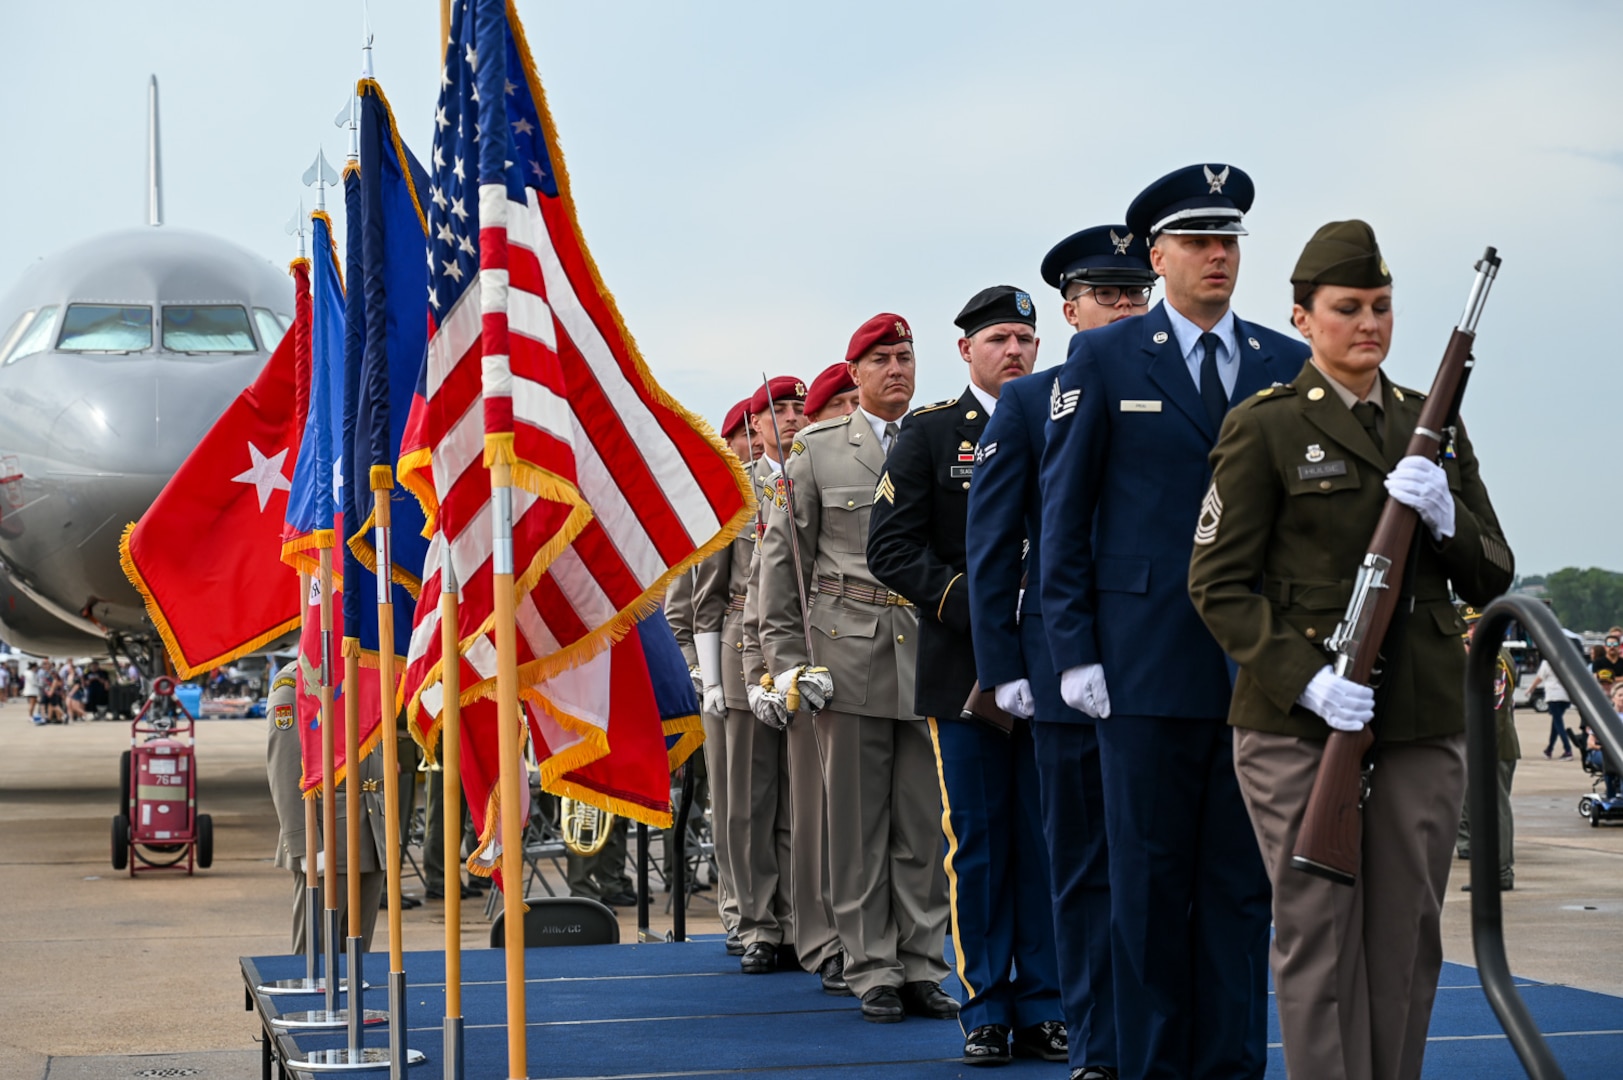 A joint honor guard from the Nebraska National Guard and the Czech Honor Guard post colors during the 2023 Guardians of Freedom Airshow opening ceremony, Aug. 26, 2023, at the Lincoln Airport, Nebraska.